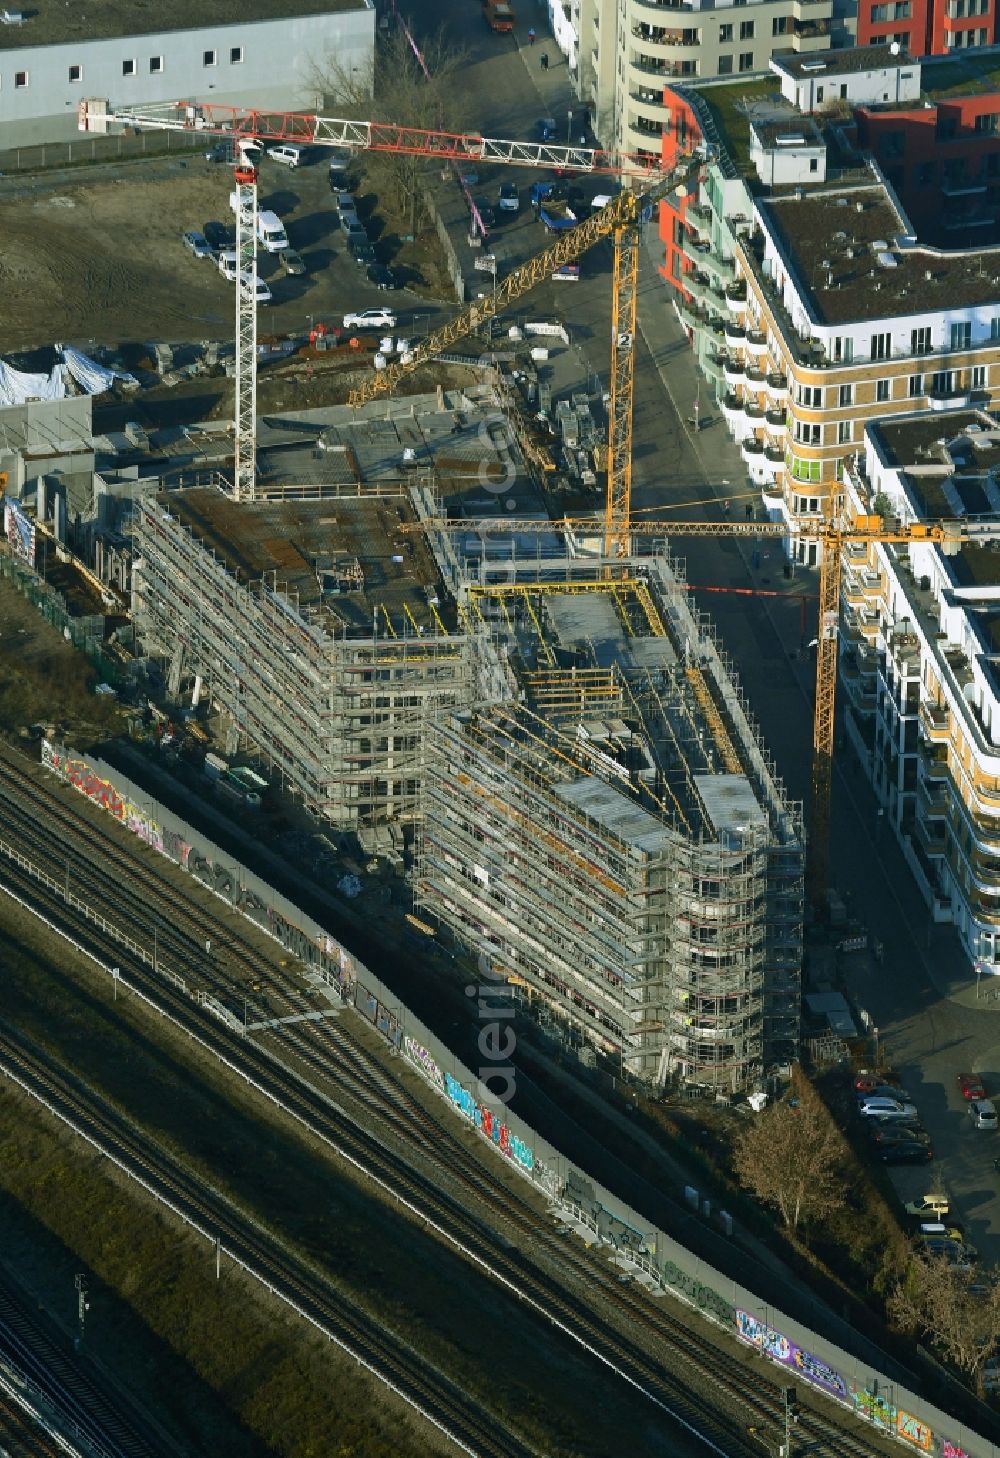 Berlin from above - Construction site for the multi-family residential building Revaler Spitze on Revaler Strasse in the district Friedrichshain in Berlin, Germany